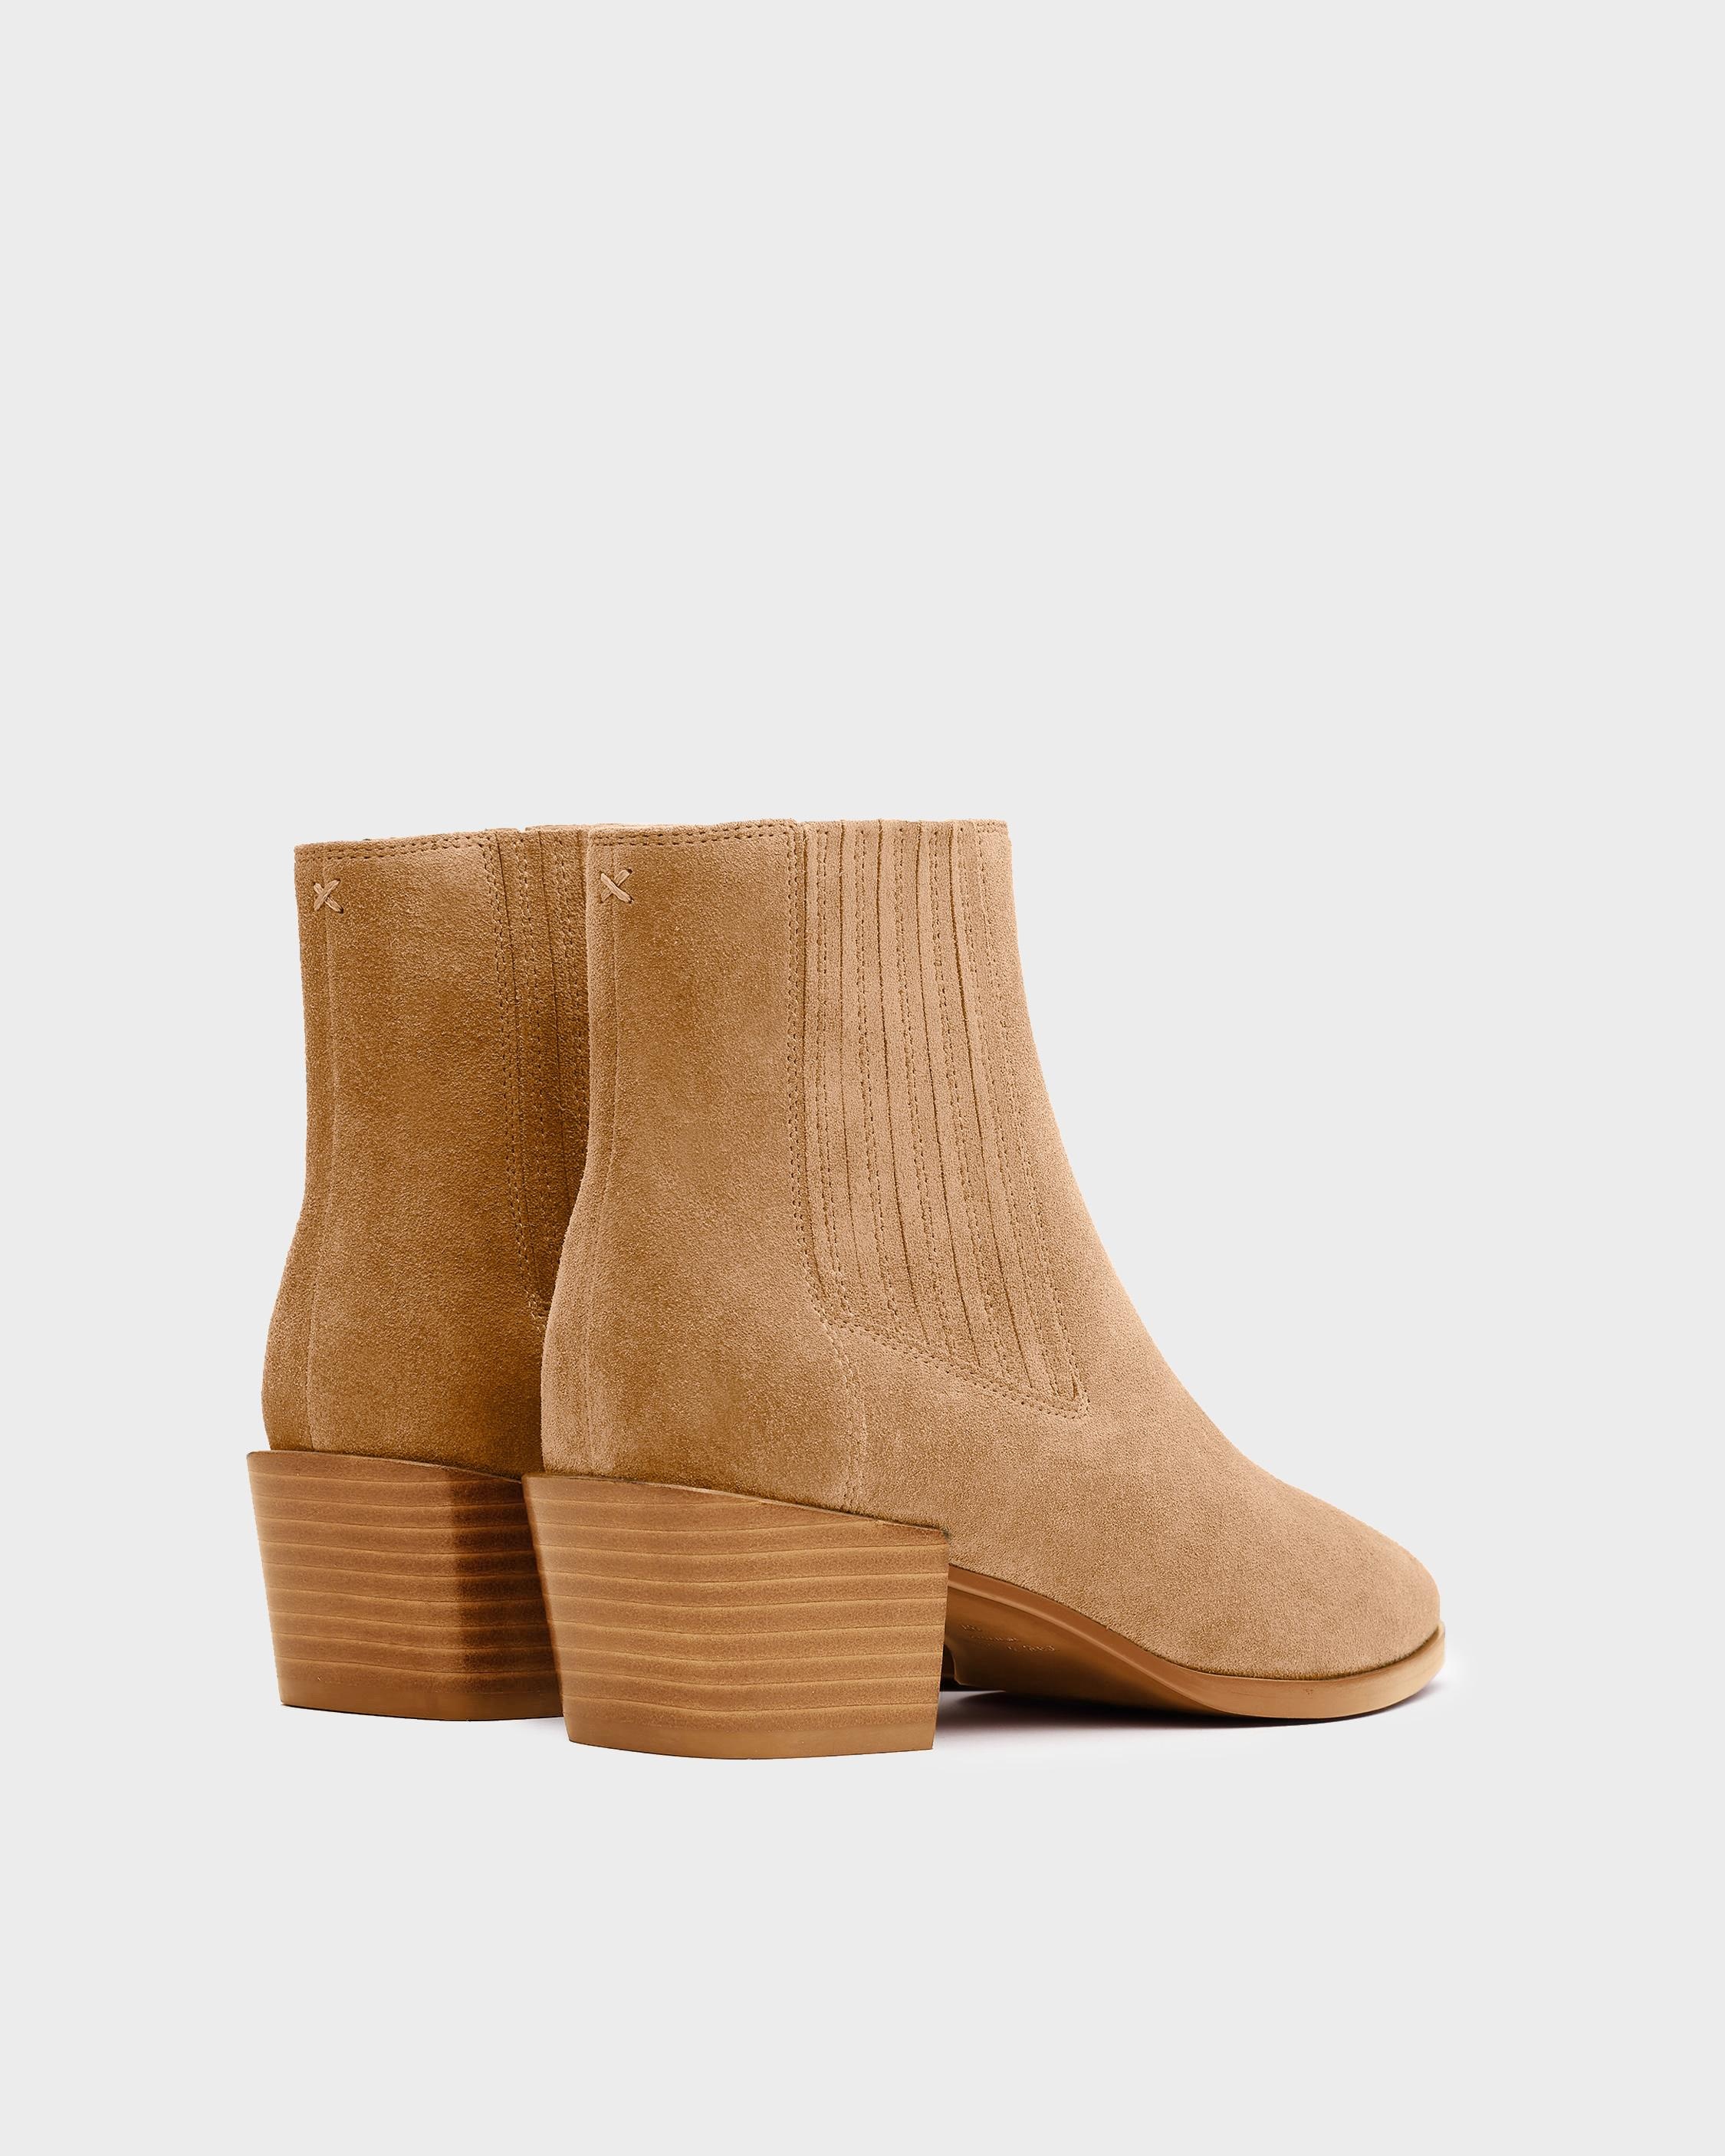 Rover Boot - Suede
Chelsea Ankle Boot - 3